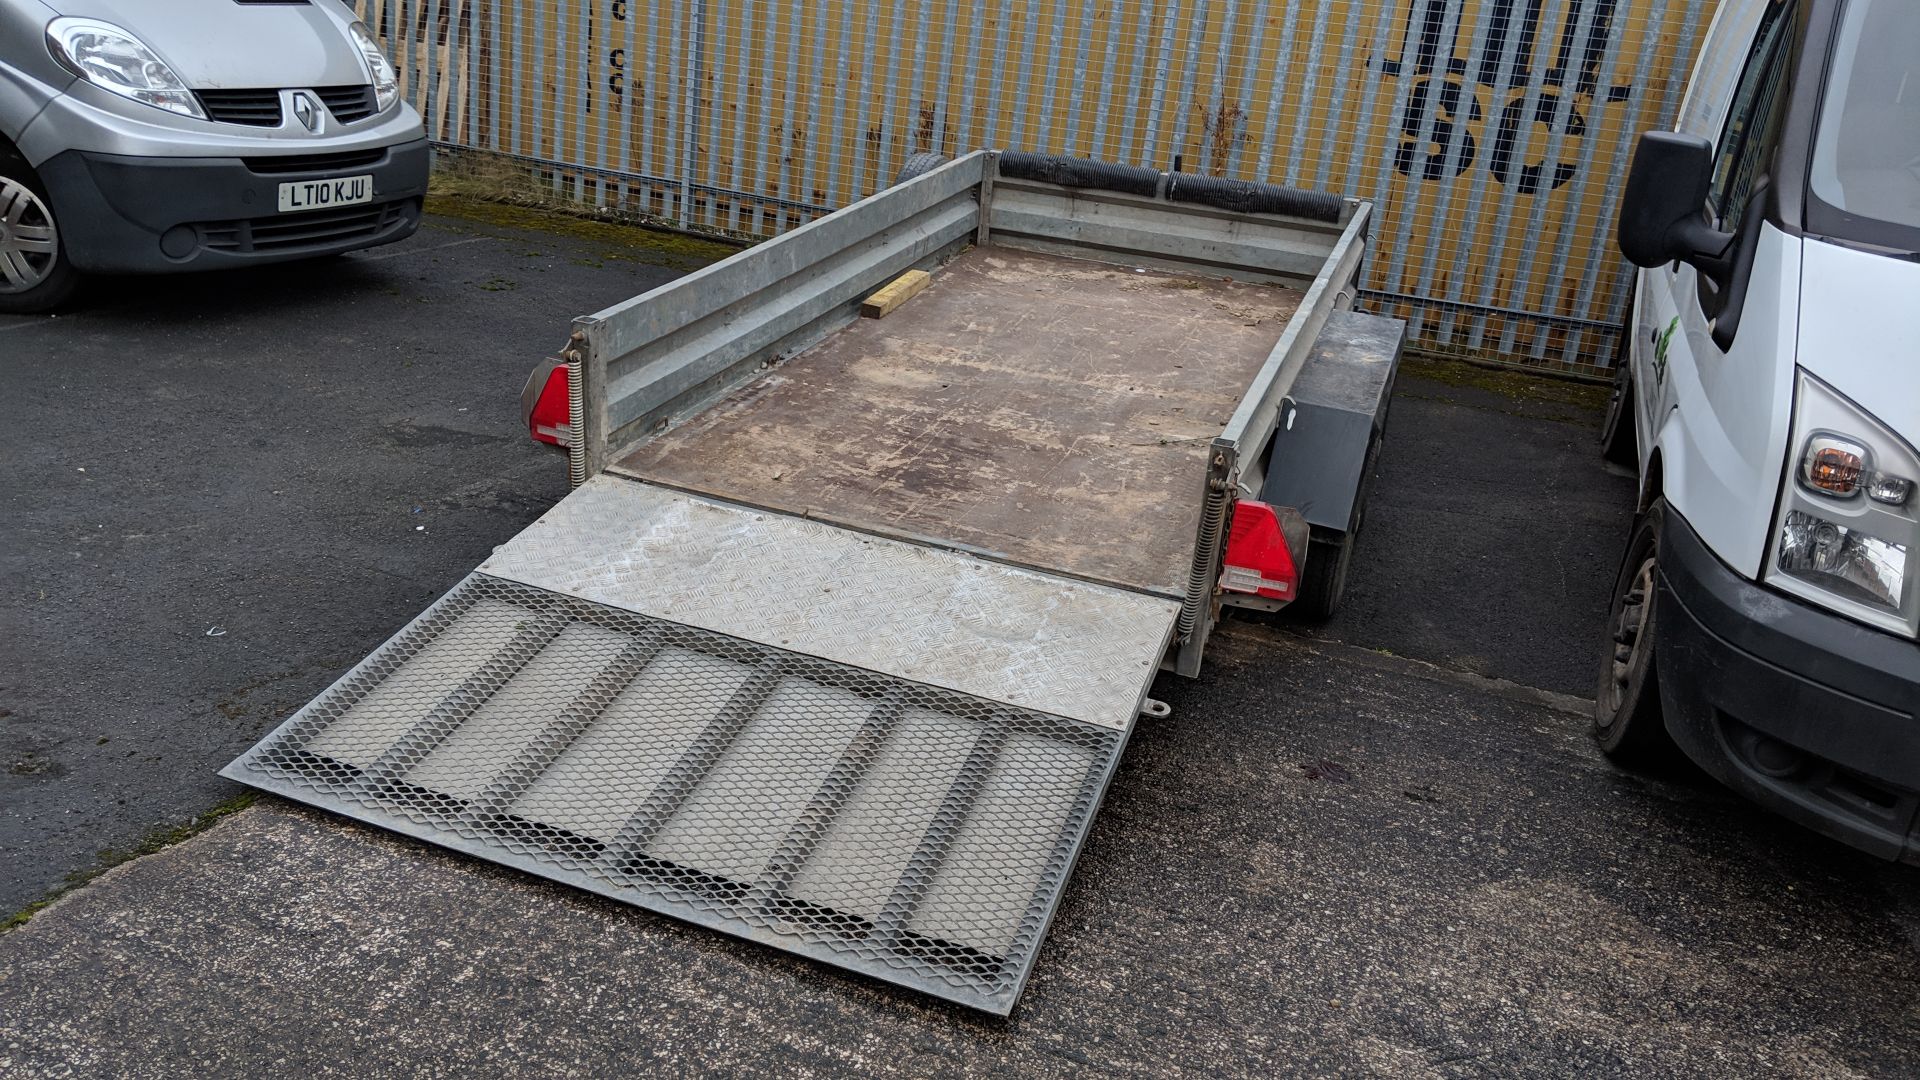 Indespension 2600kg twin axle 10x5 trailer with fold down loading ramp at one end, marked Type V7 on - Image 10 of 17